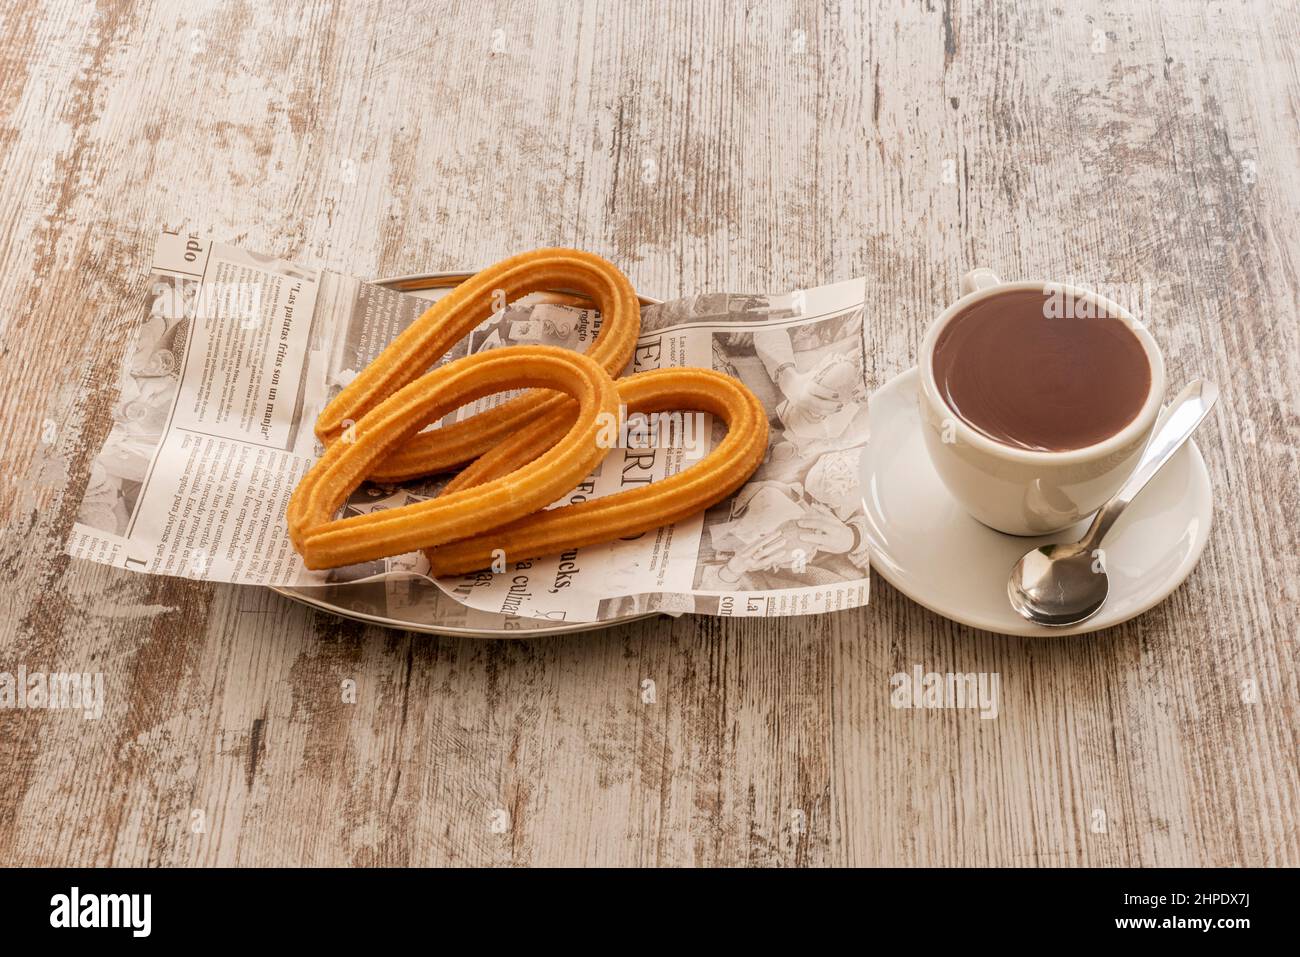 Typical Spanish breakfast or snack of hot chocolate with fried churros Stock Photo